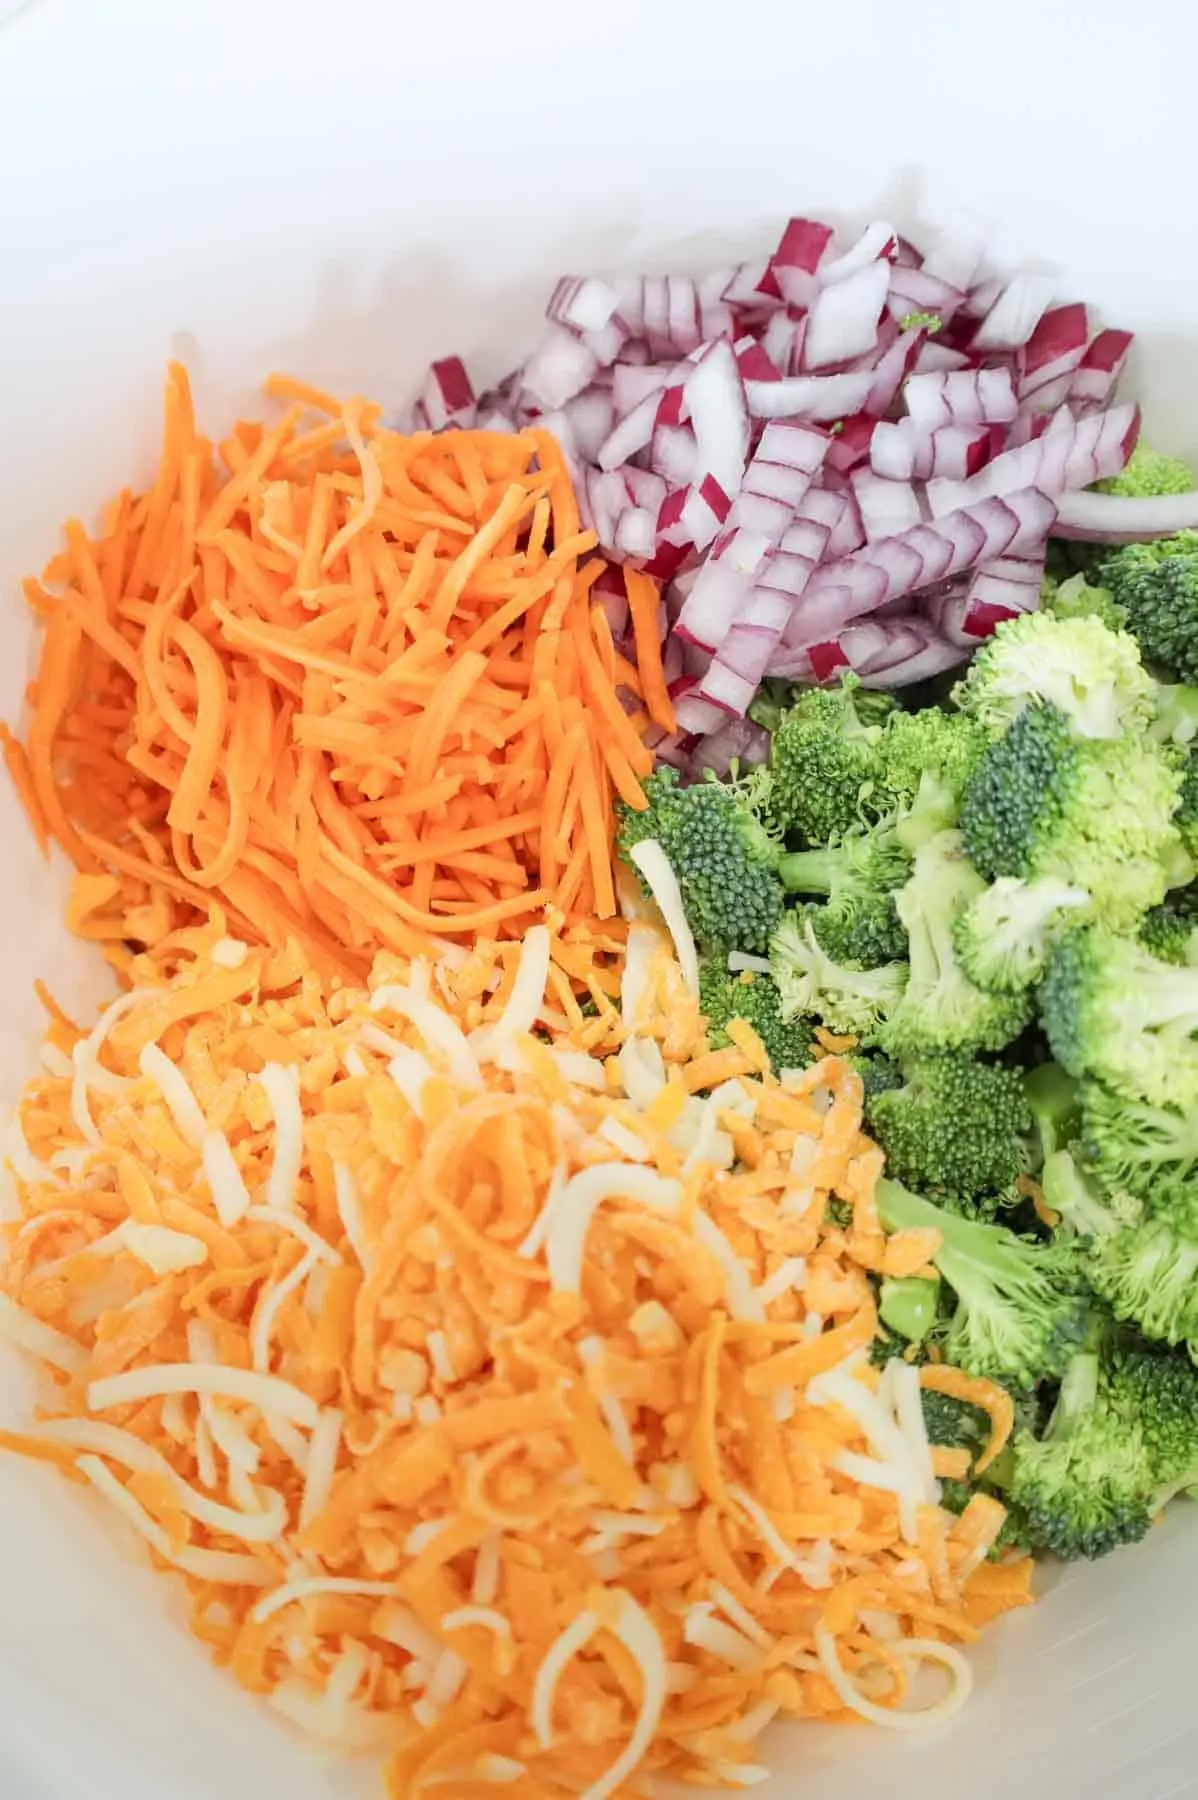 Shredded cheese, shredded carrots, diced red onions and chopped broccoli florets in a bowl